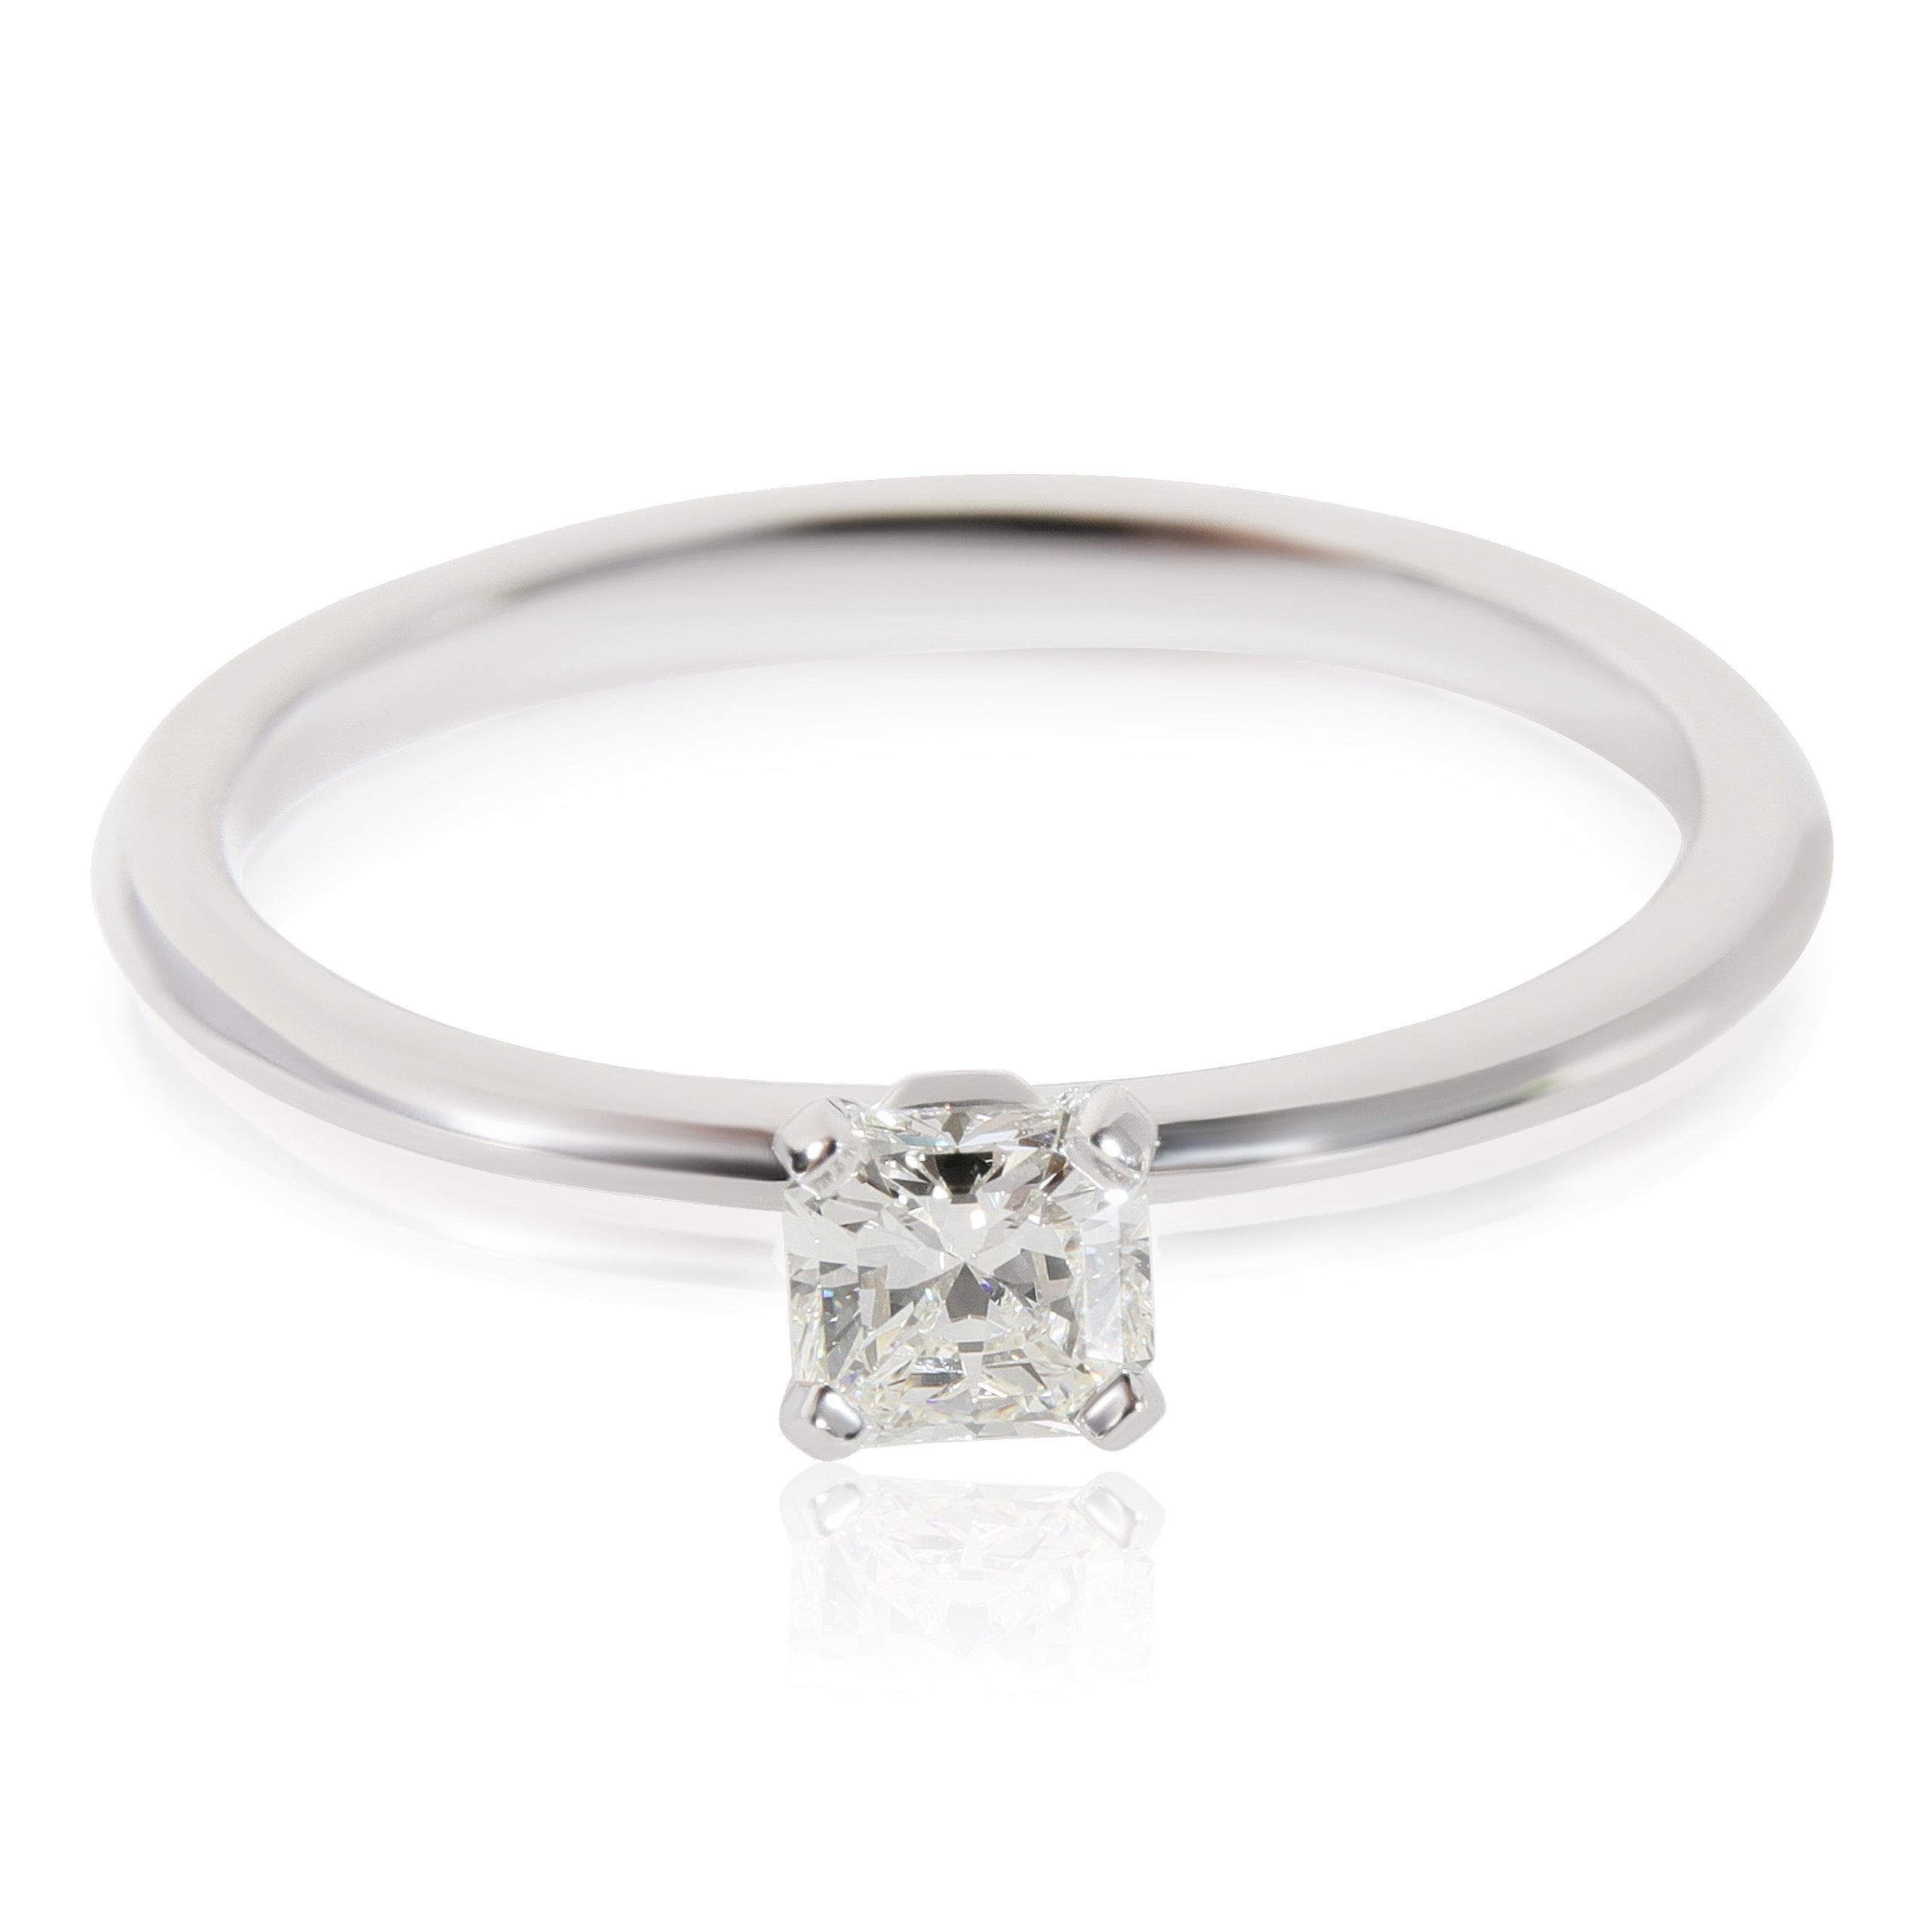 Tiffany & Co. Tiffany & Co. Diamond Solitaire Engagement Ring in Platinum I VS1 0.27 CTW Size ONE SIZE - 1 Preview